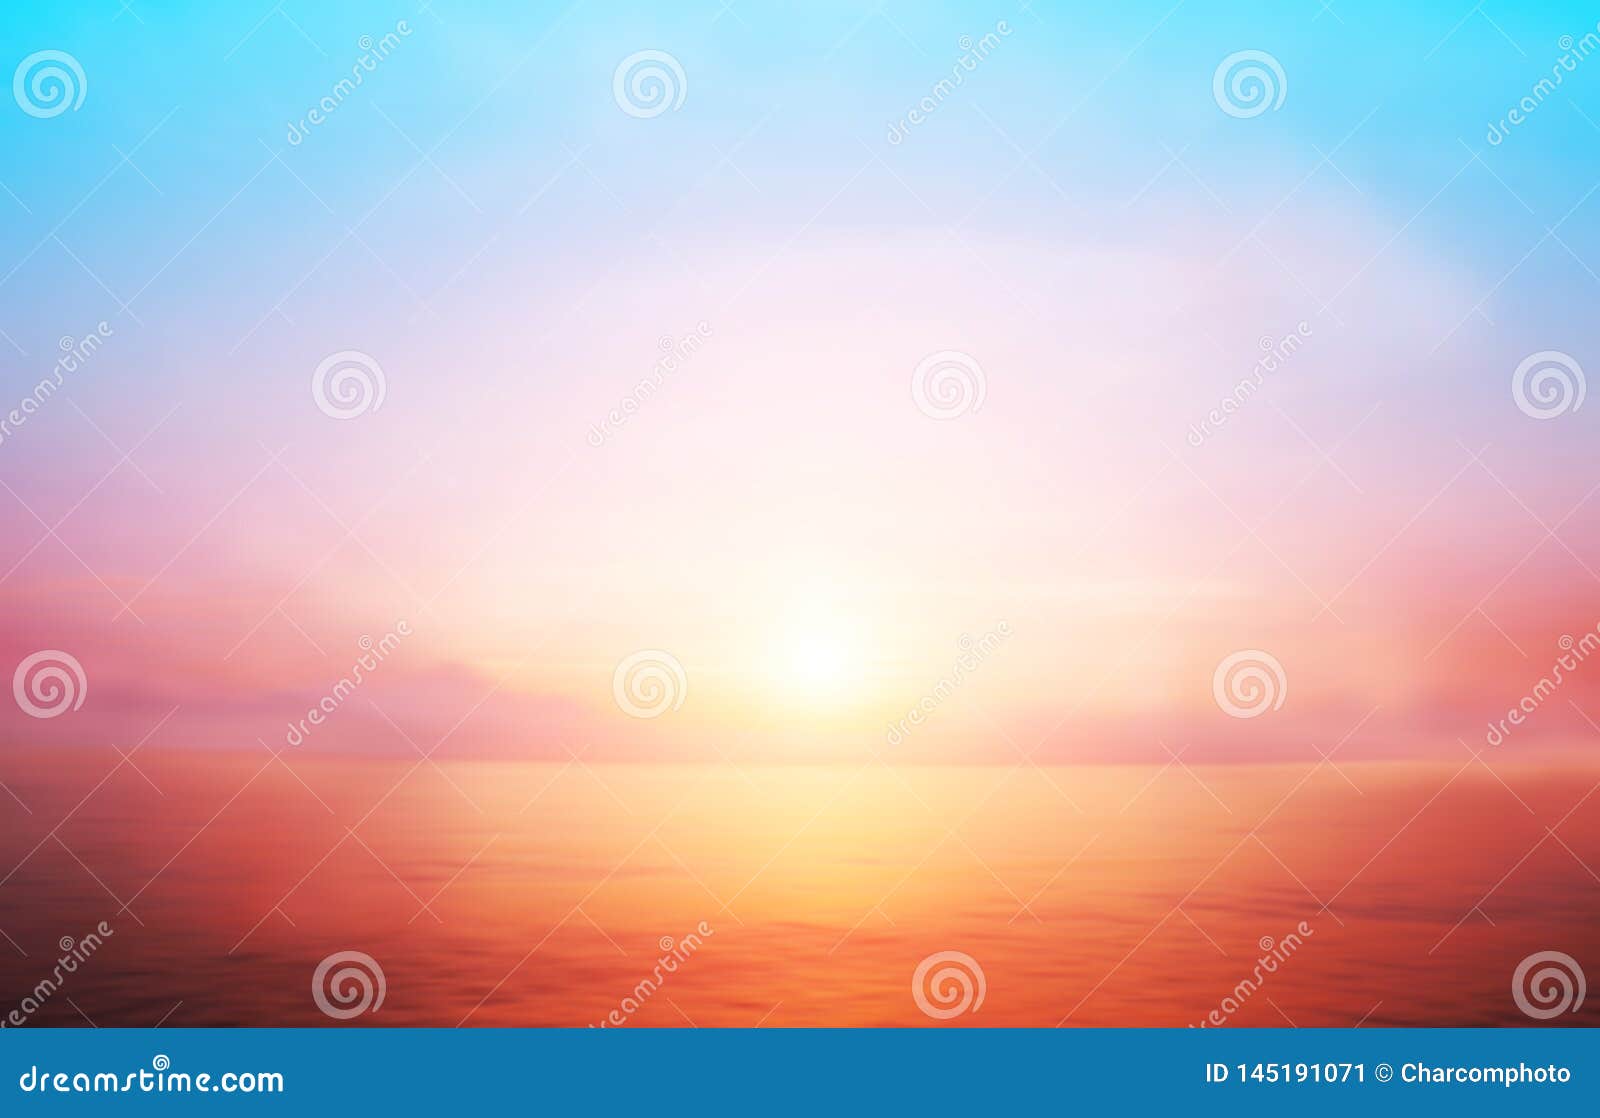 sunset horizon cool sea background on horizon tropical sandy beach; relaxing outdoors vacation with heavenly mind view at a resort